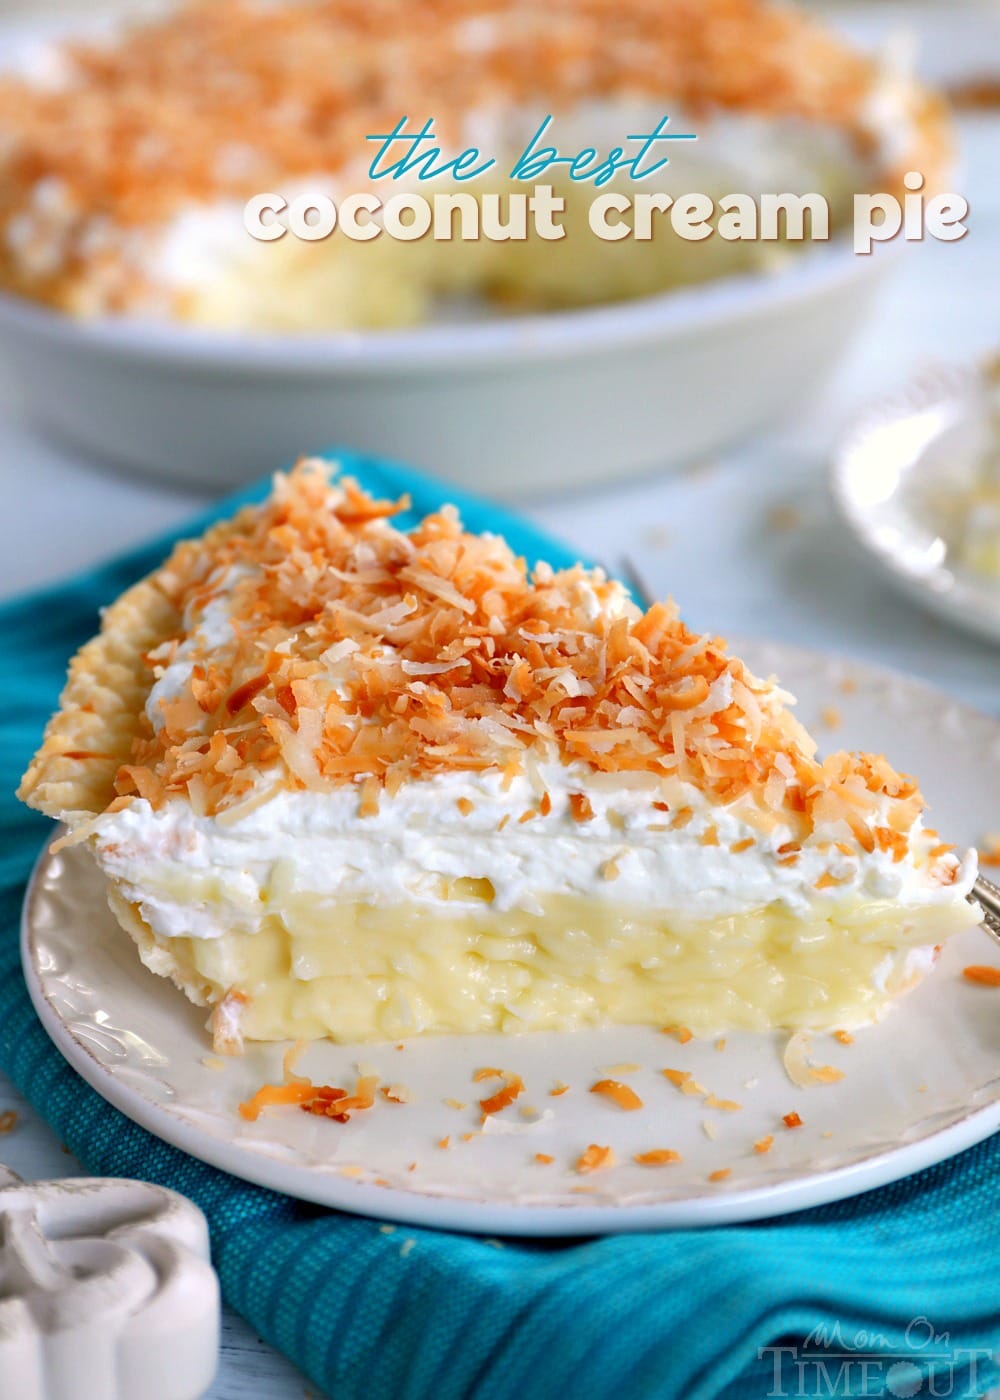 The Best Coconut Cream Pie Mom On Timeout,Granite Kitchen Islands With Seating